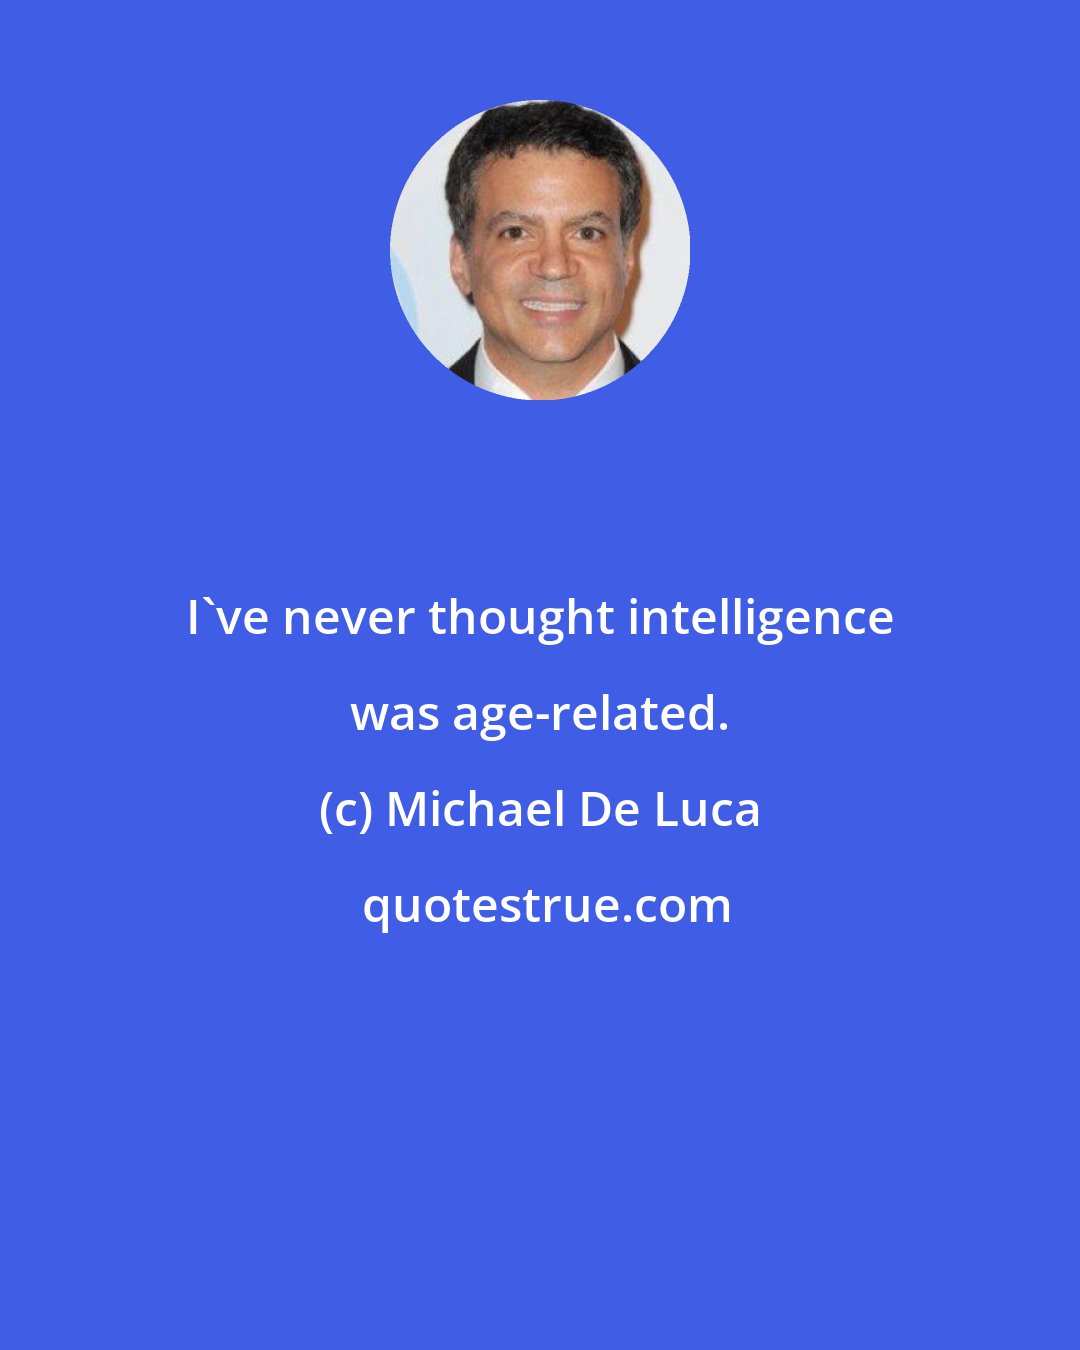 Michael De Luca: I've never thought intelligence was age-related.